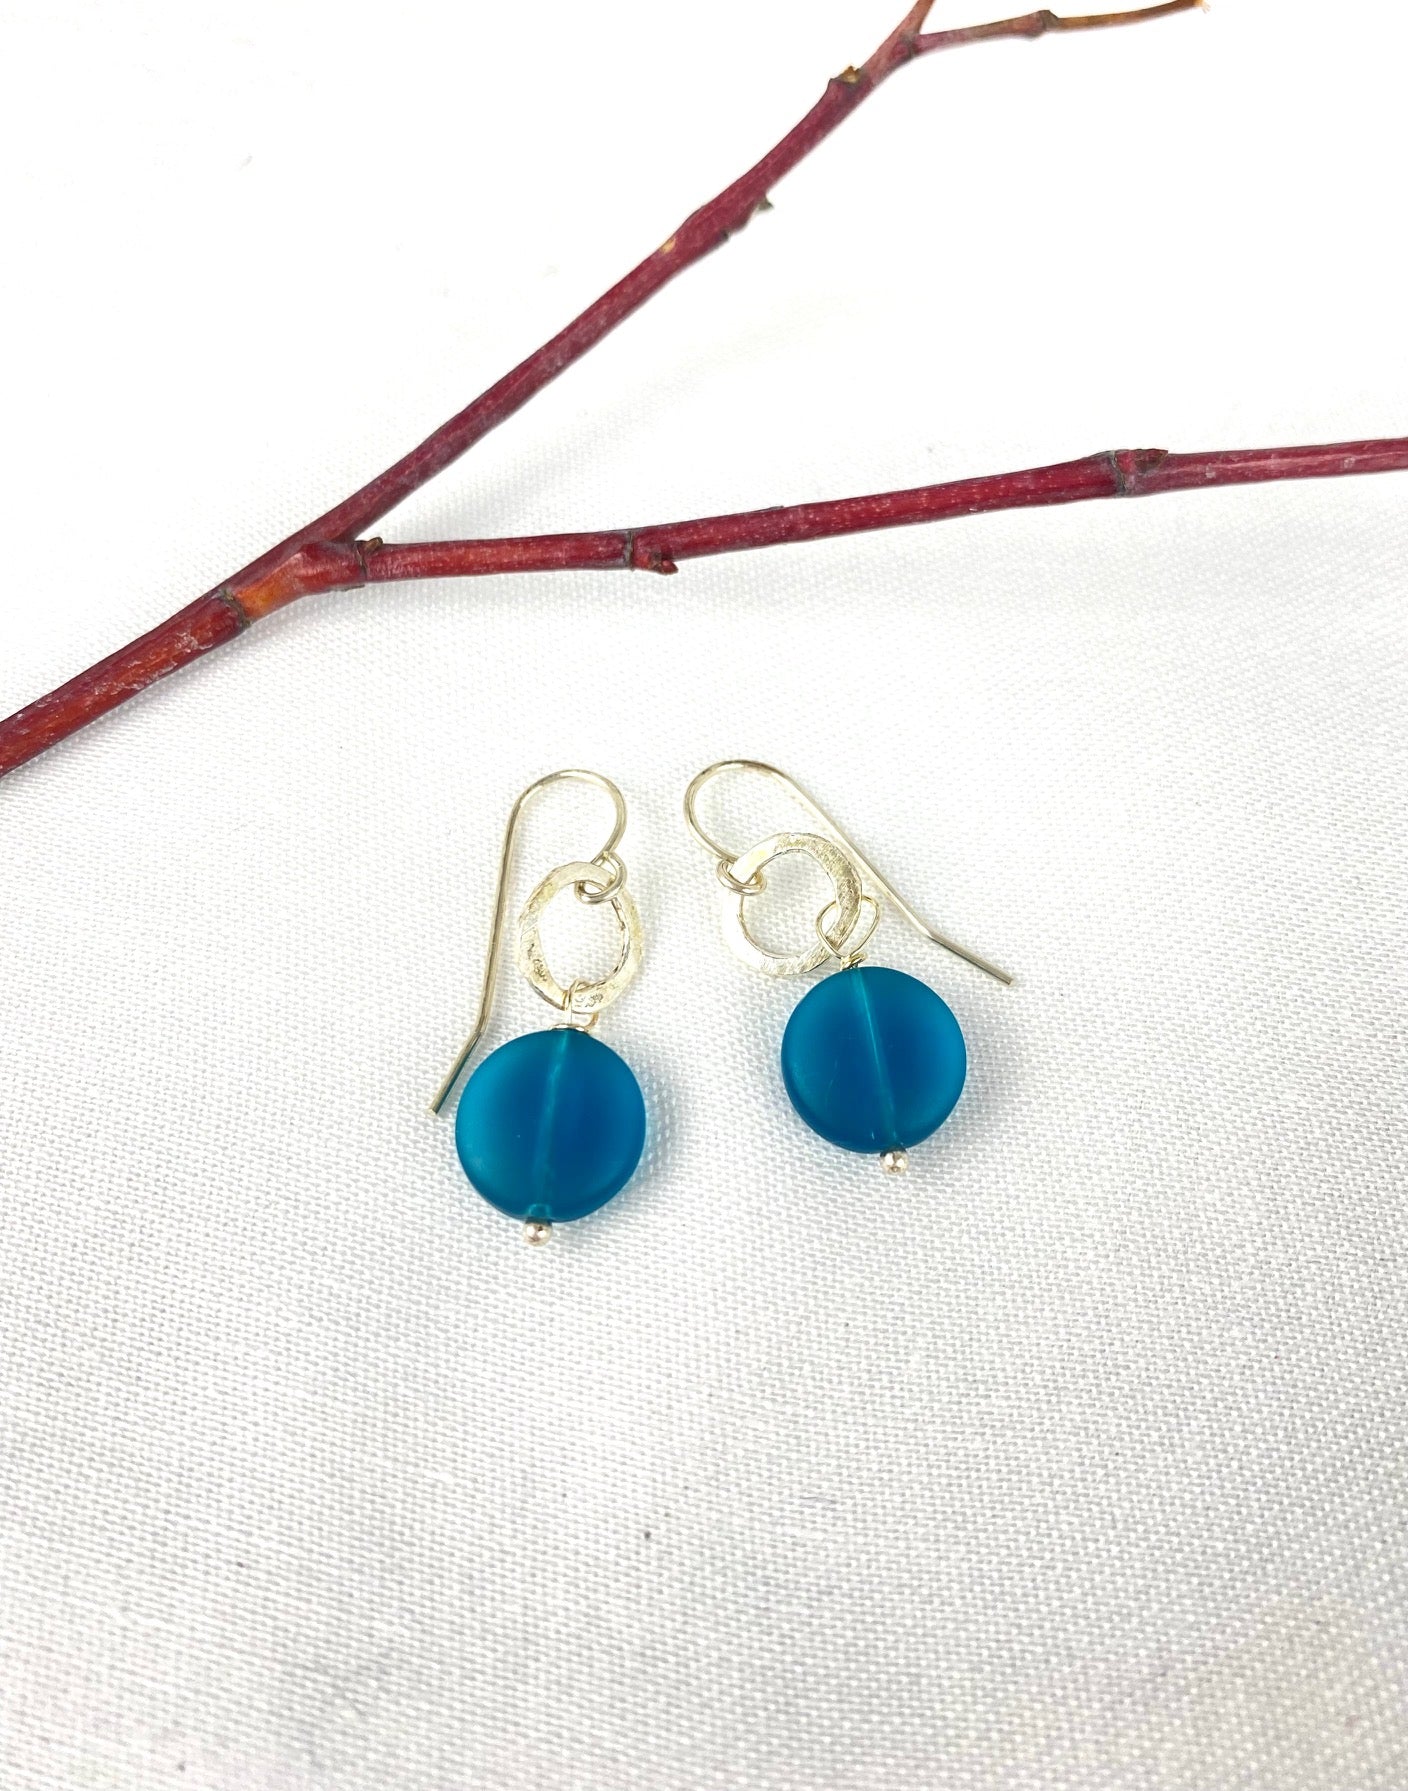 Blue Sea glass like bead with handmade hammered silver circle women's fashion earring jewelry